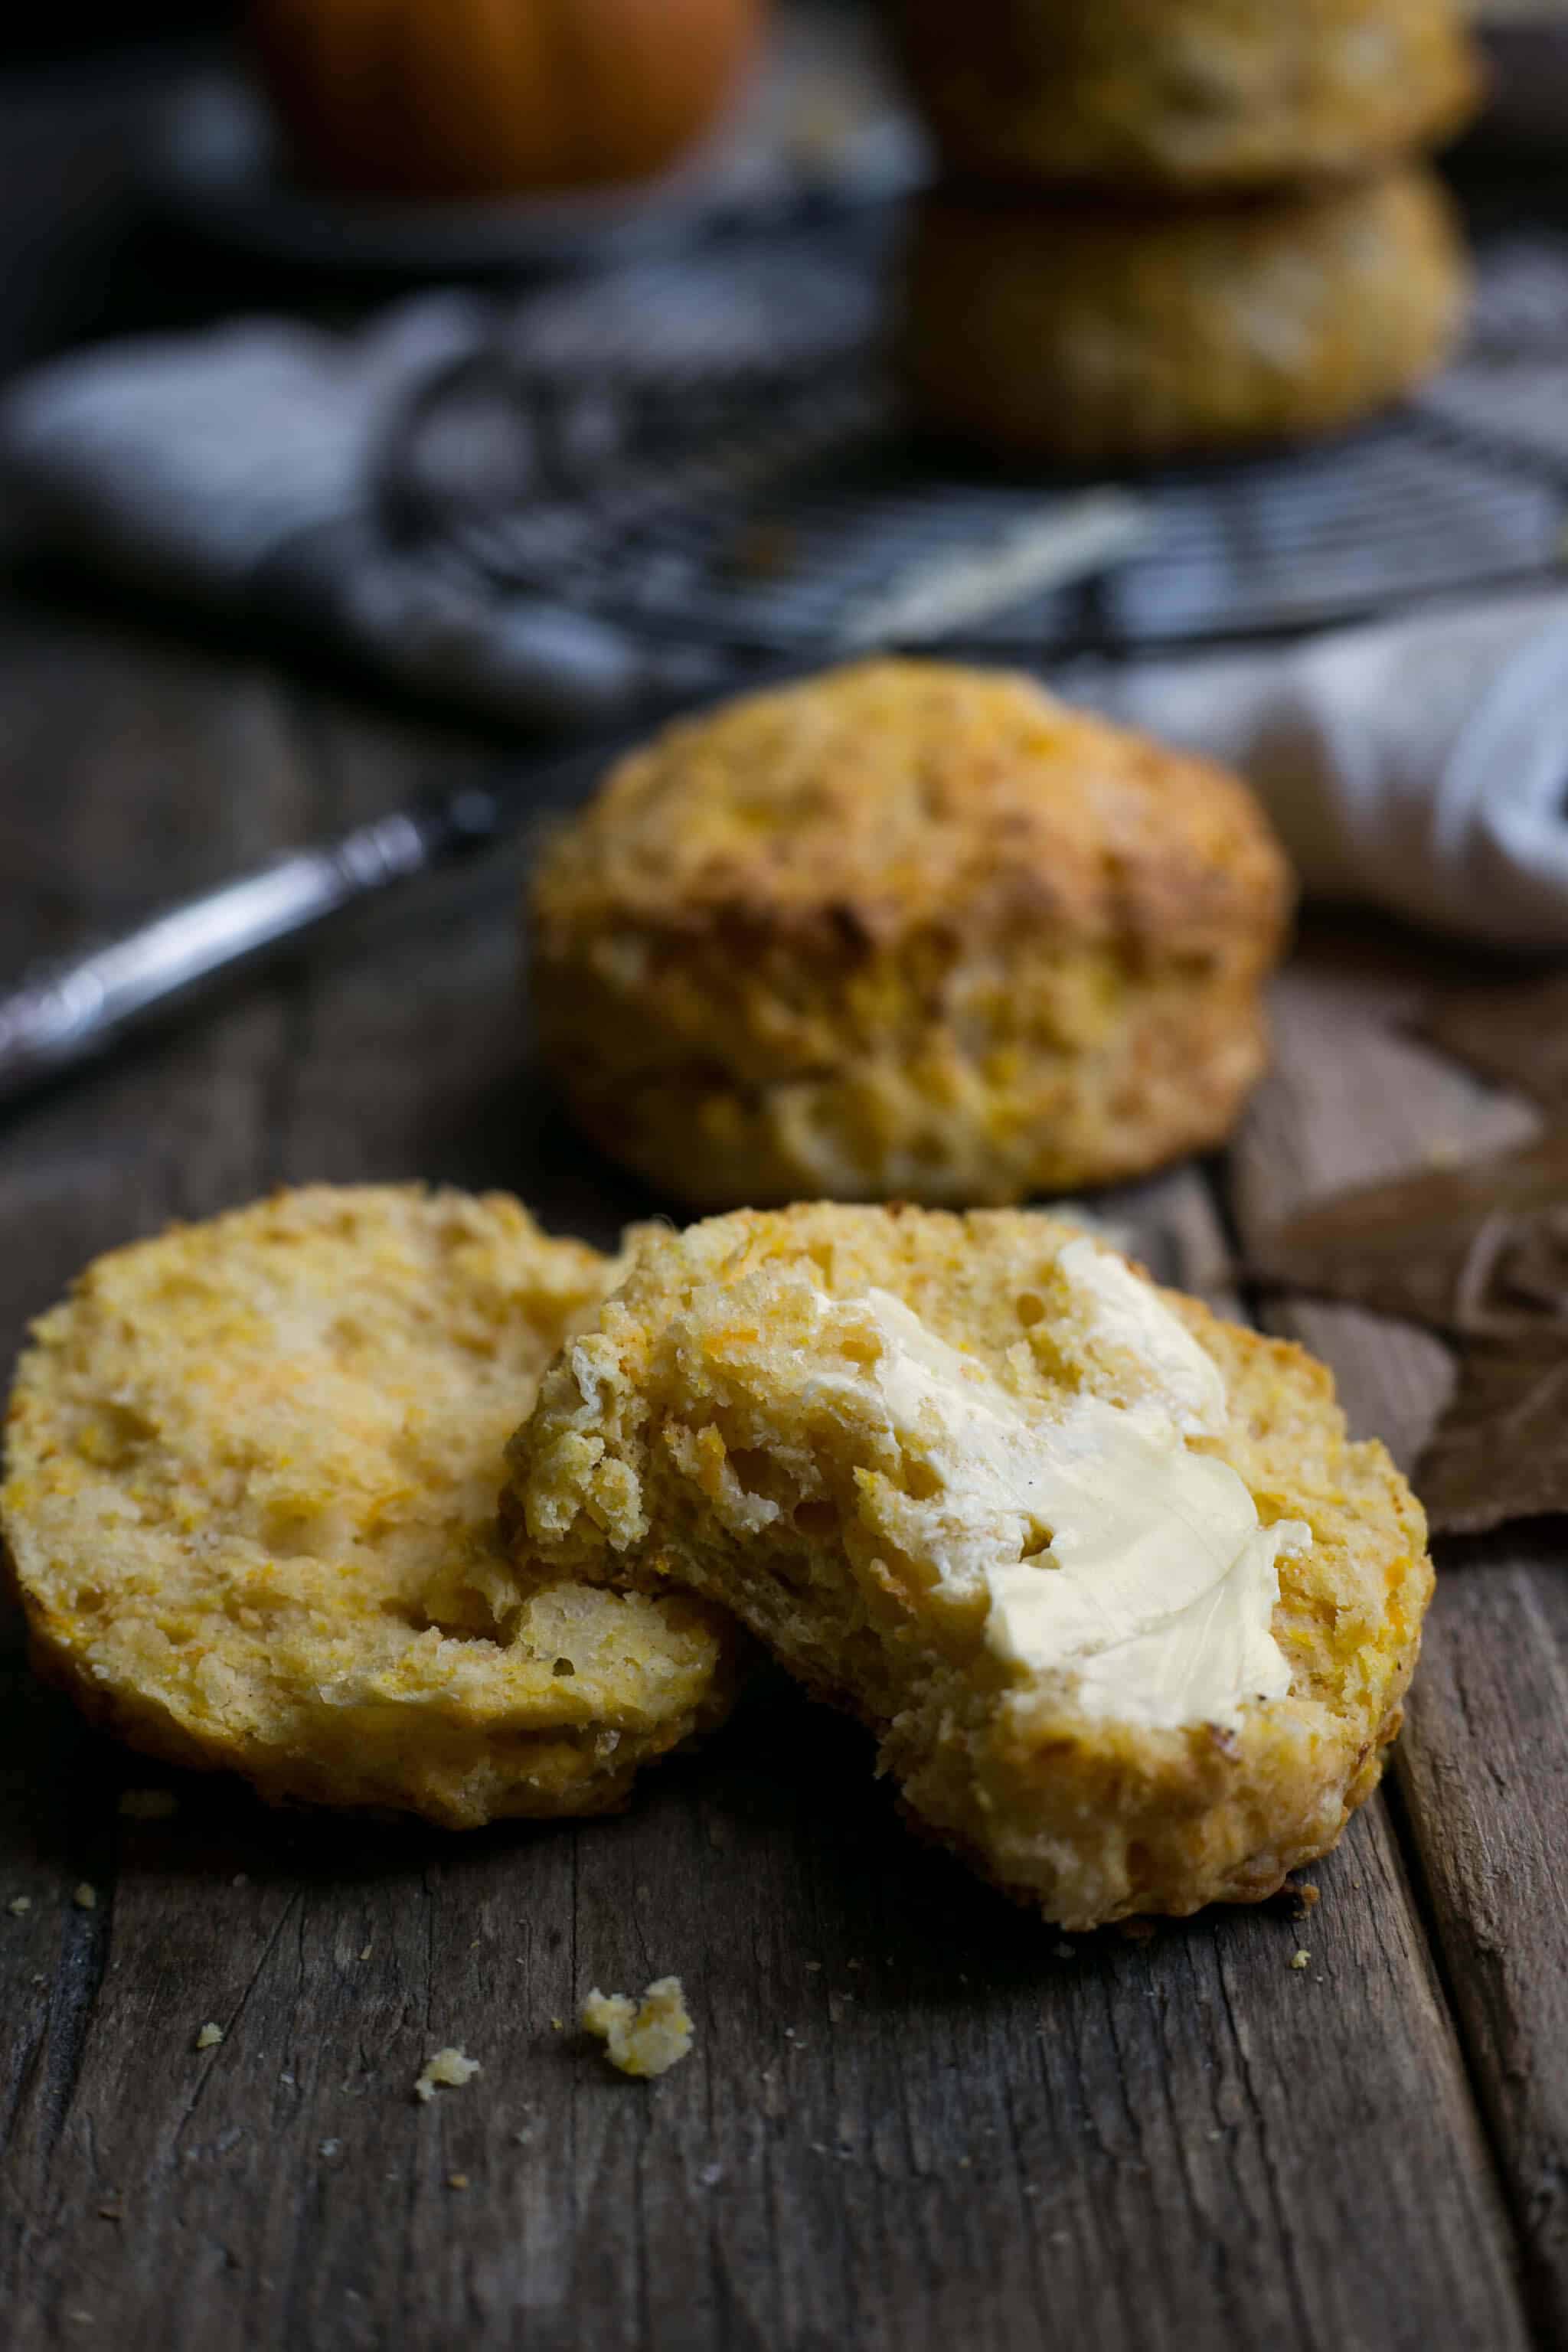 Savoury scones with pumpkin and cheese. Delicious traditional scones with the seasonal twist #pumpkin #scones | via @annabanana.co